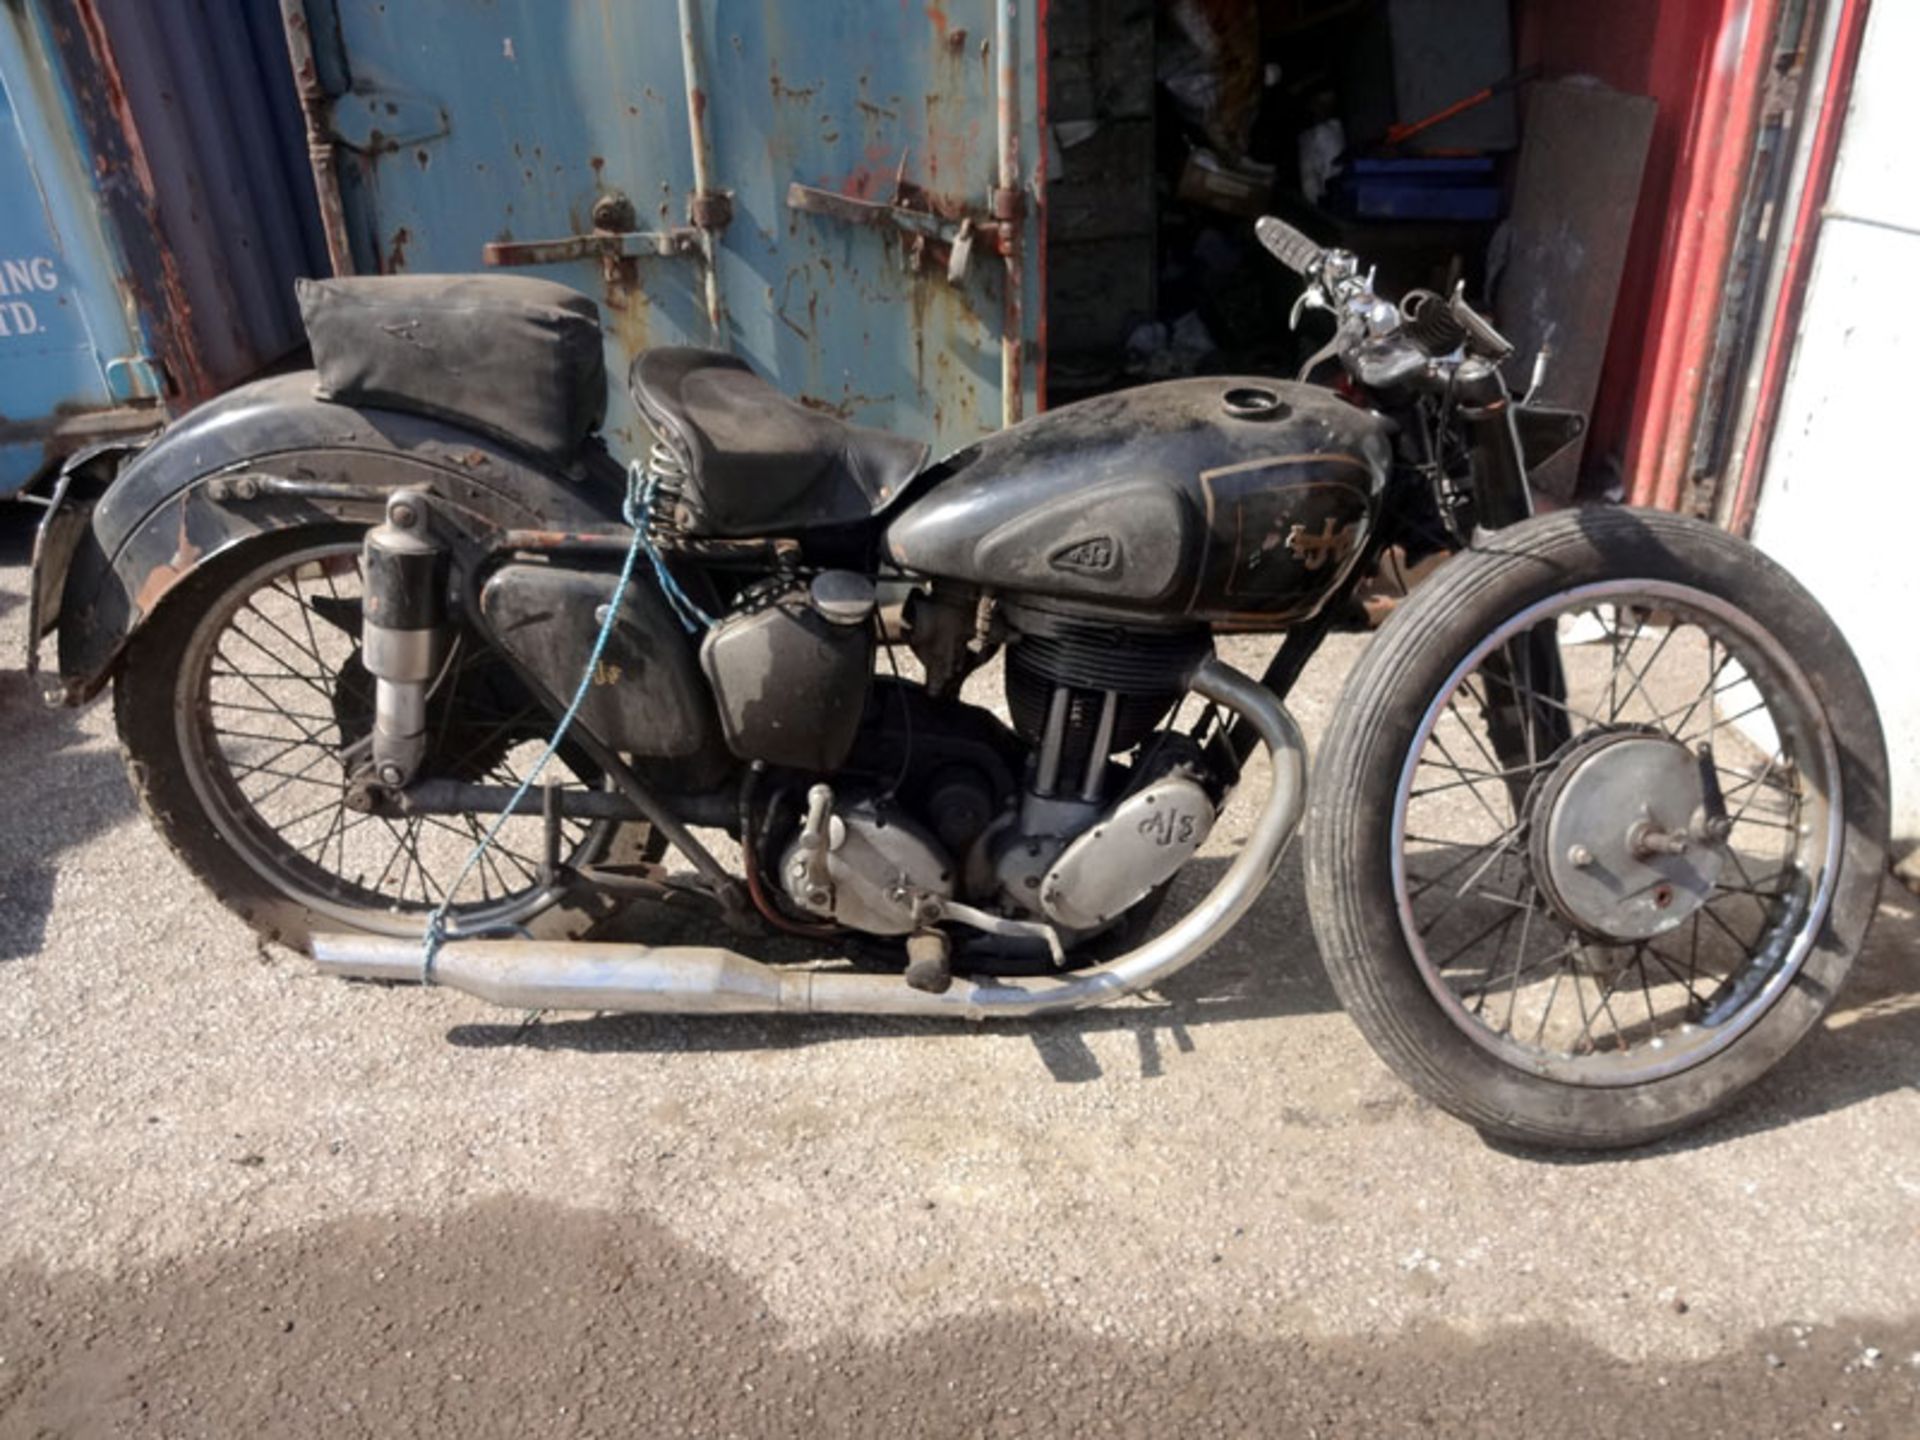 - Barn find condition

- 500cc model

- Great restoration project

- Two previous owners

-